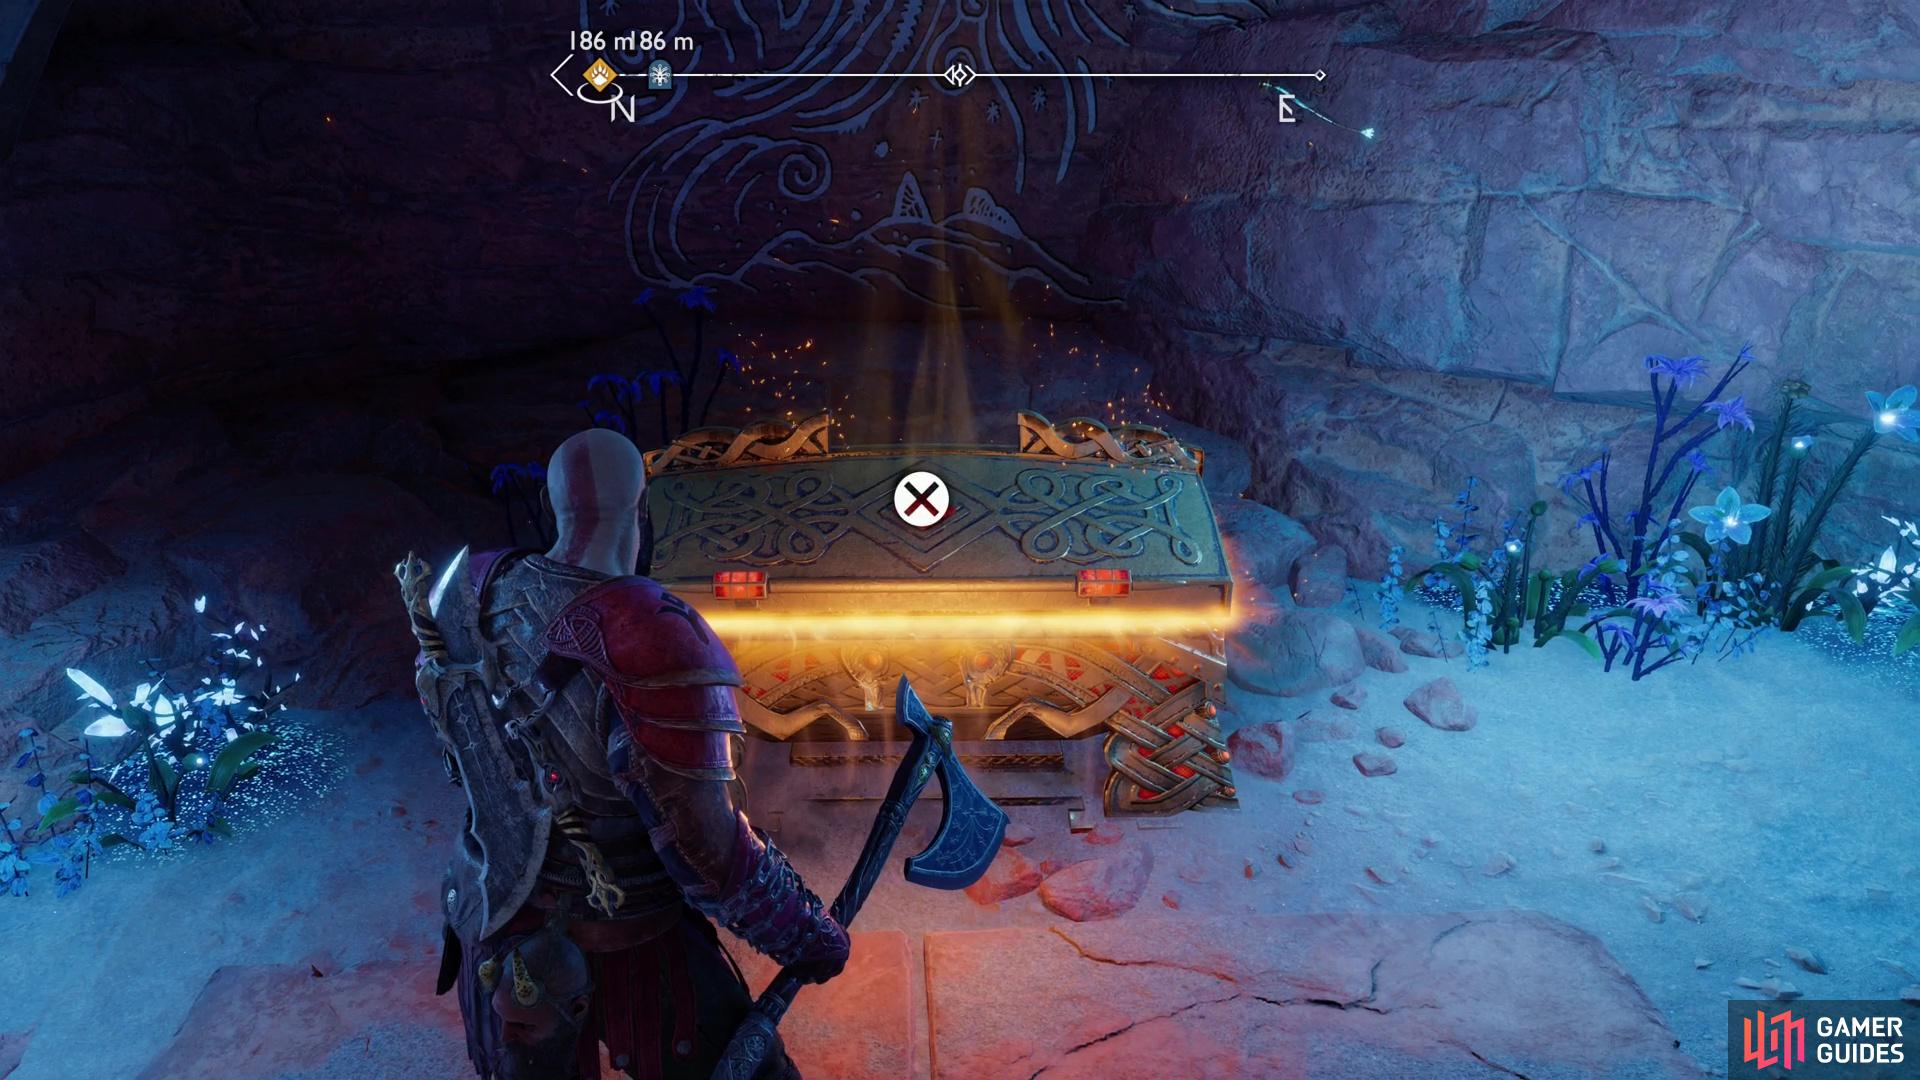 then climb to reach a Legendary Chest containing Hel's Touch, a Light Runic Attack for the Leviathan Axe.